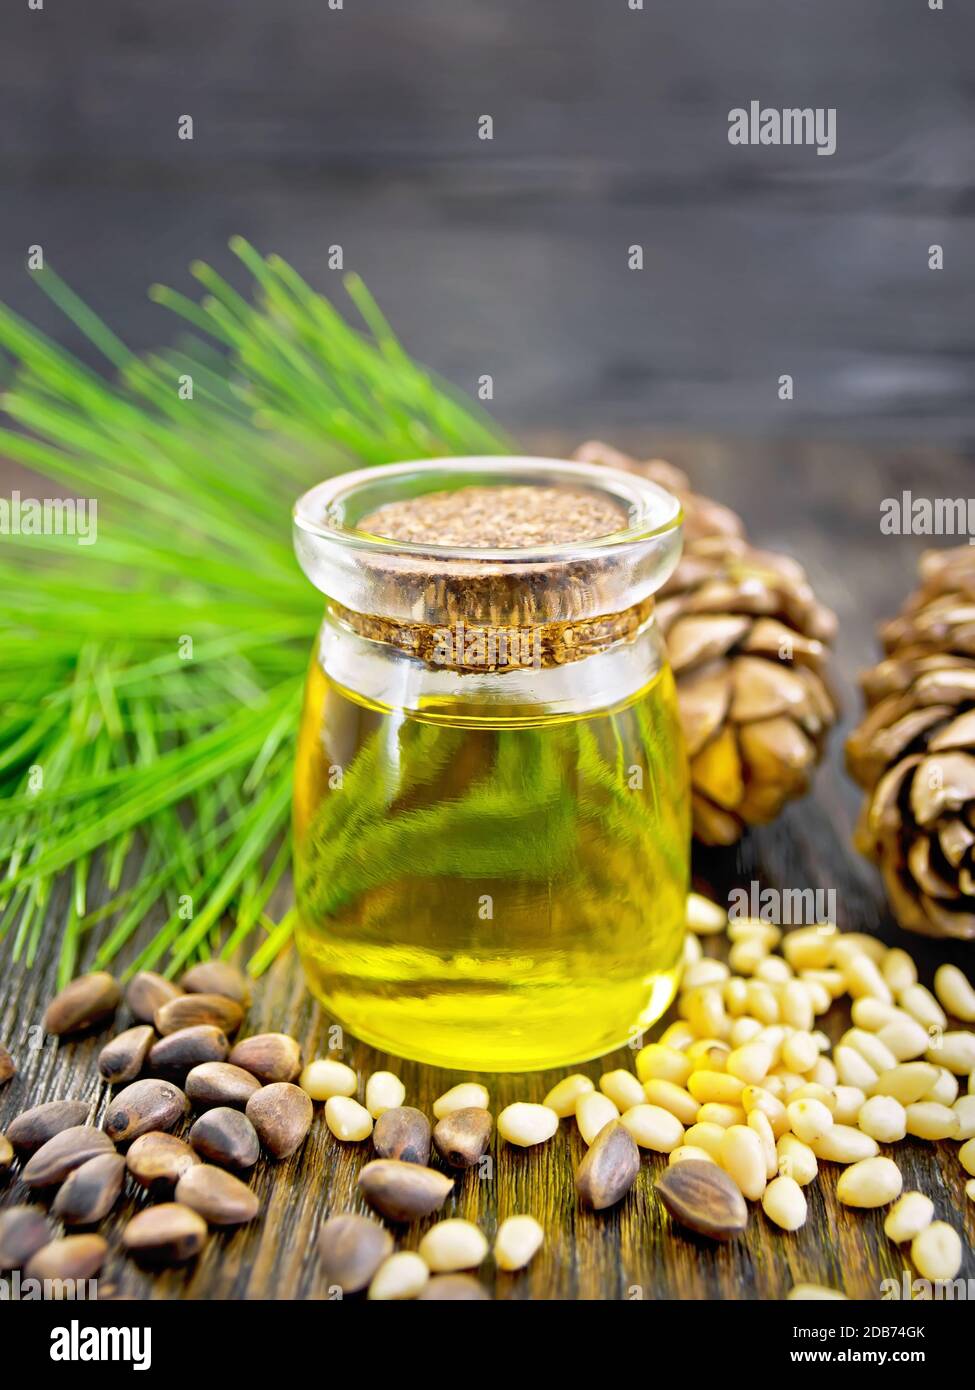 Cedar oil in a glass jar, two cedar cones, nuts and green twigs on a wooden board background Stock Photo